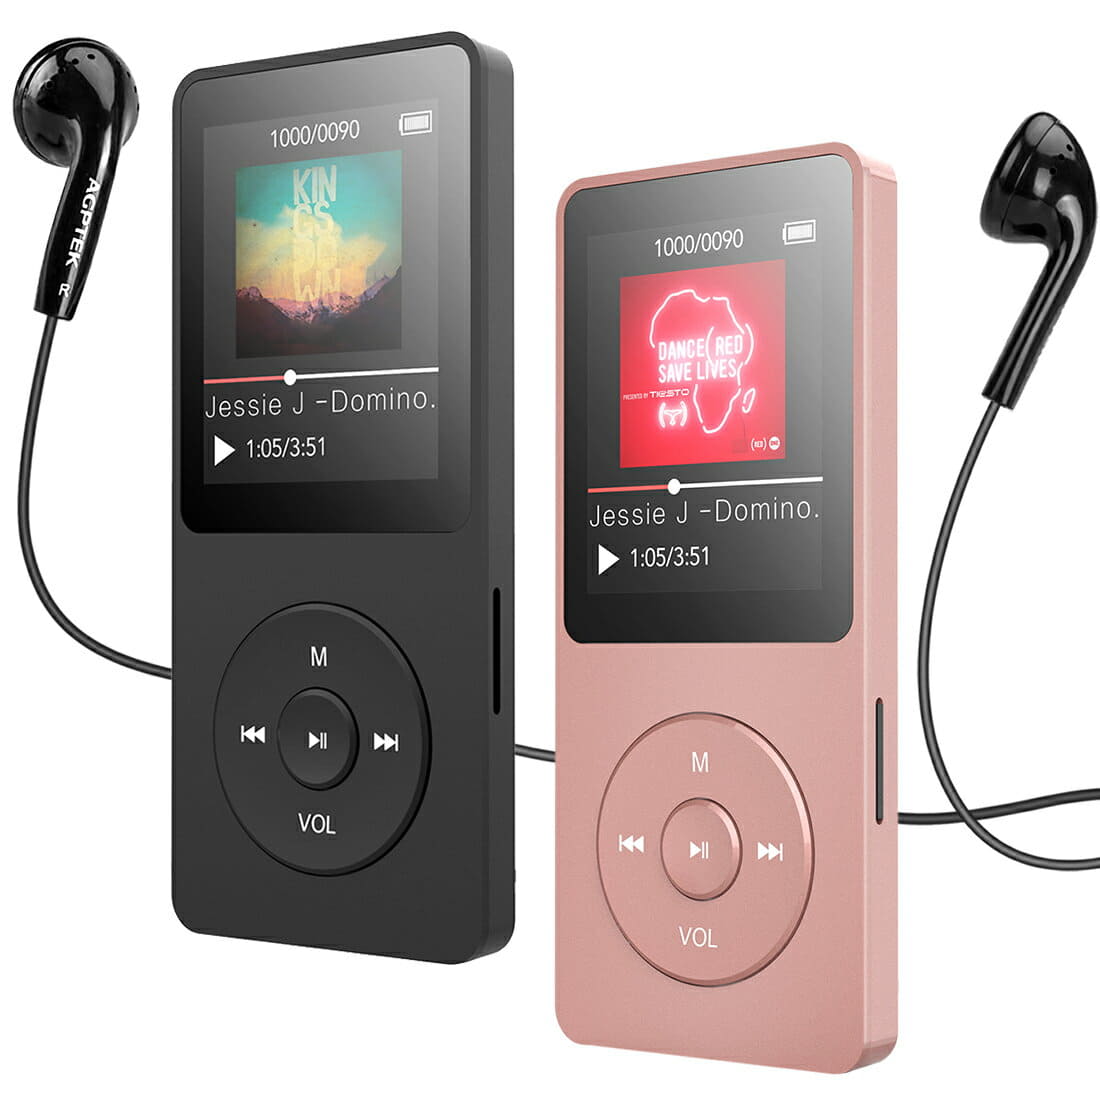 New]Two colors of correspondence A02ST incorporation 16GB mp3 player music  player music player pink/Black is selectable to AGPTEK Bluetooth 4.0 MP3  player HIFI super A-B repeat language study function/ /FM Radio micro